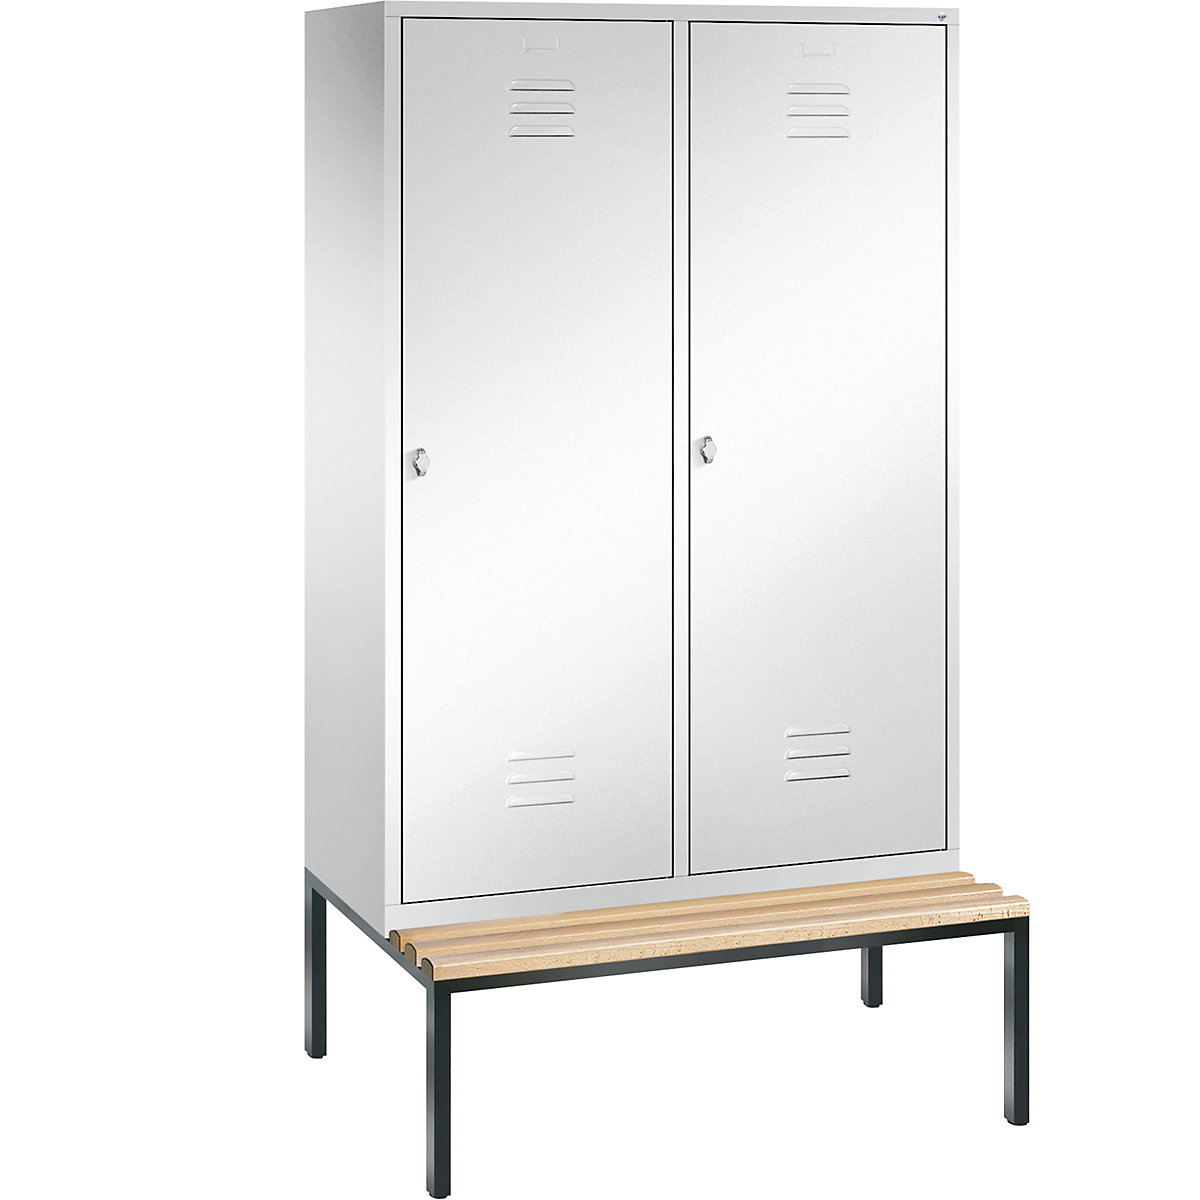 CLASSIC cloakroom locker with bench mounted underneath, door for 2 compartments - C+P